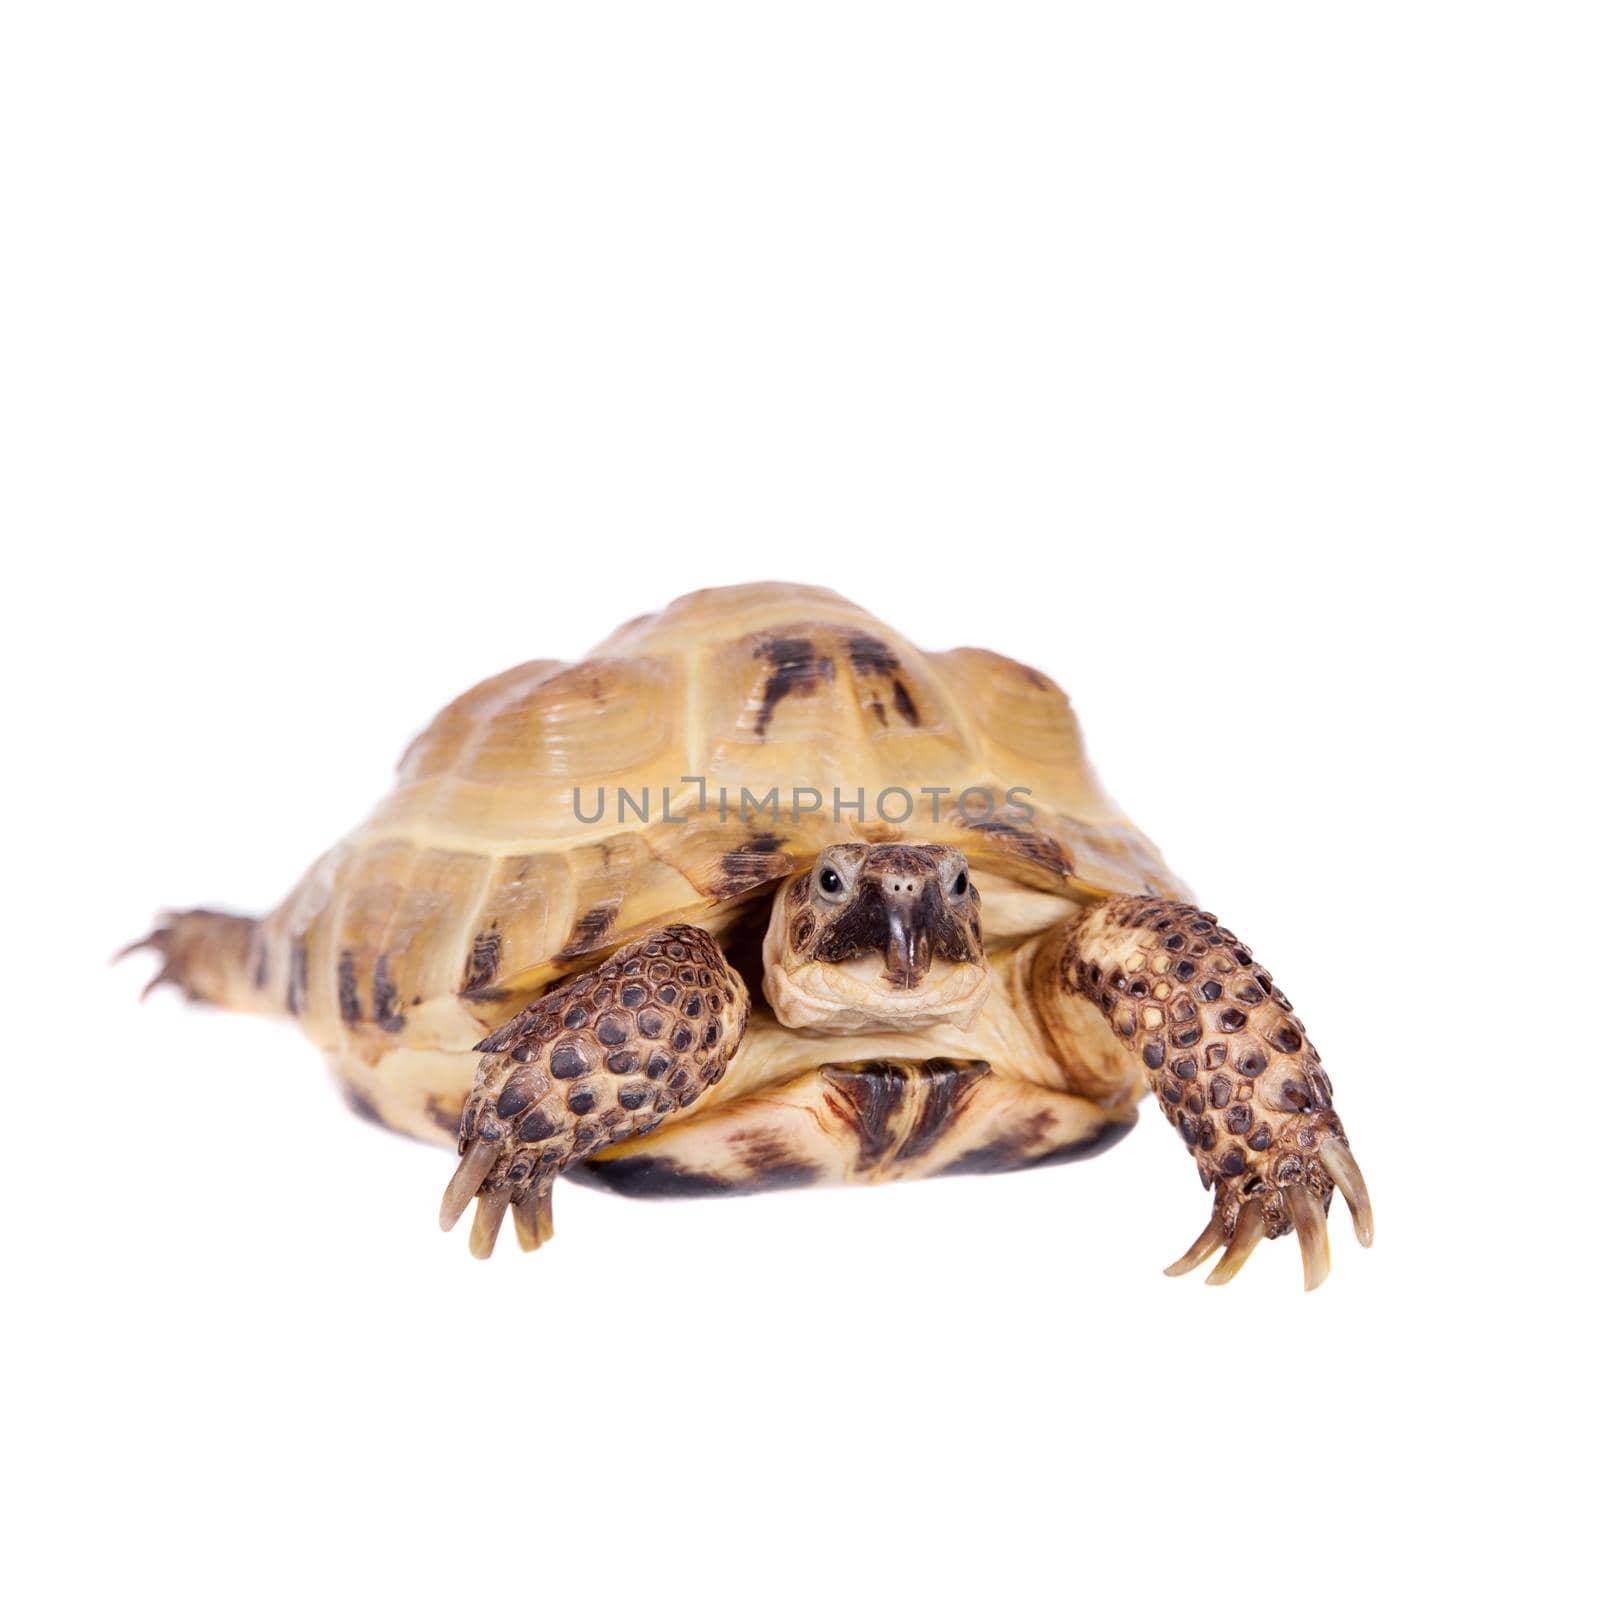 Central Asian tortoise on white background by RosaJay